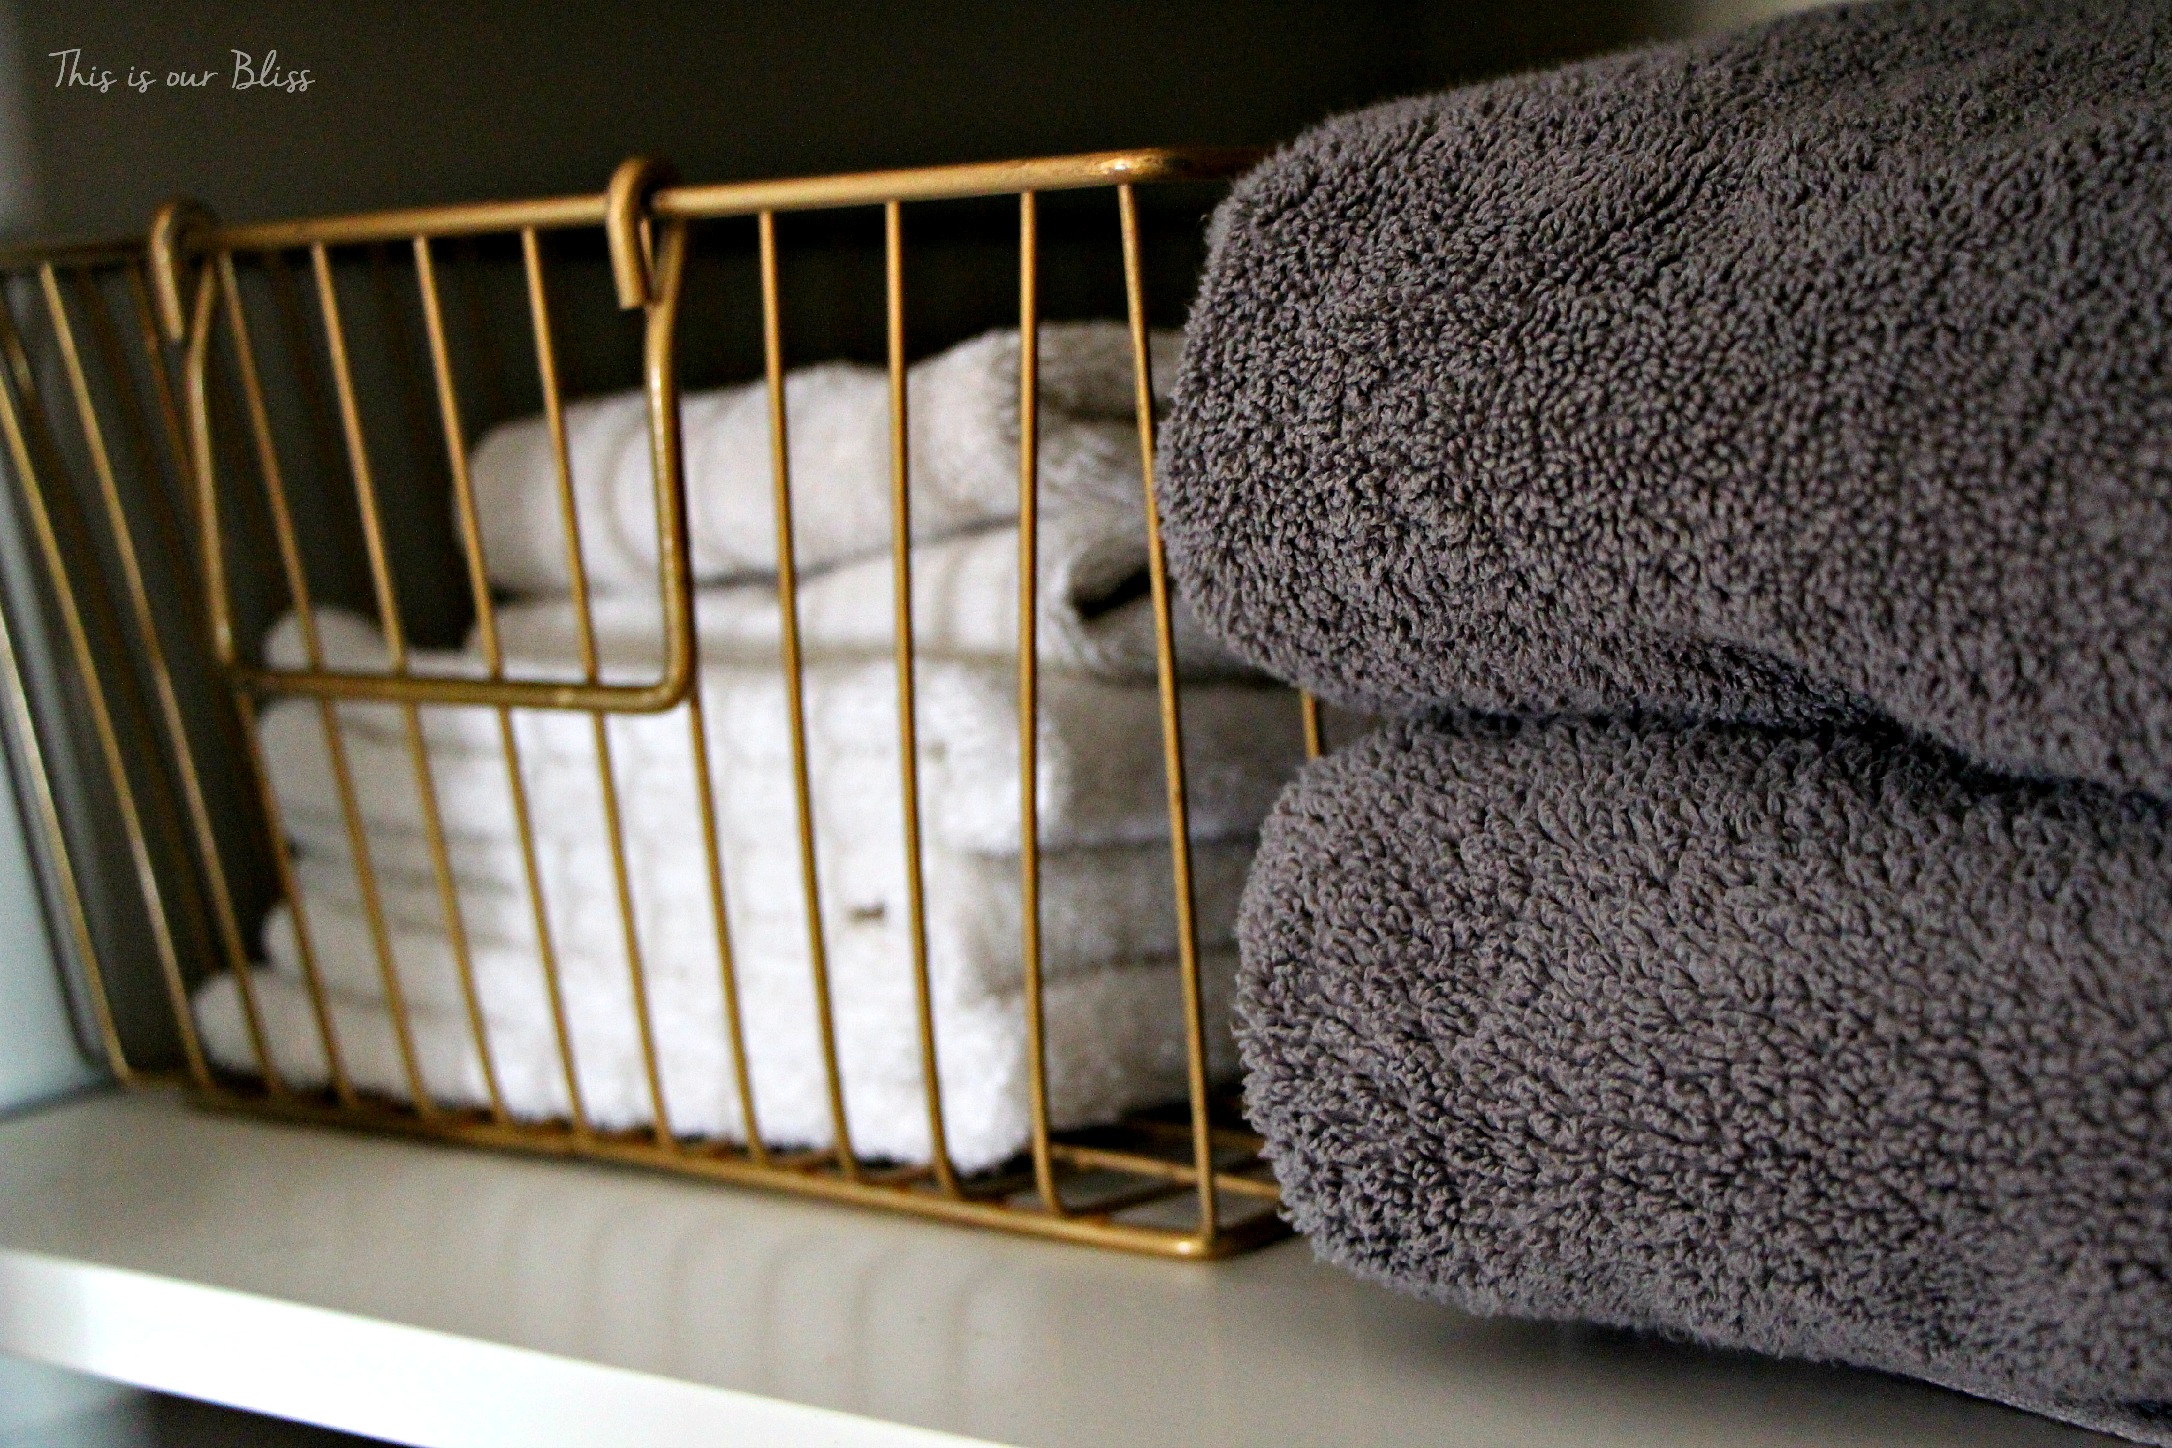 Linen closet makeover - gold basket - declutter & organize - This is our Bliss